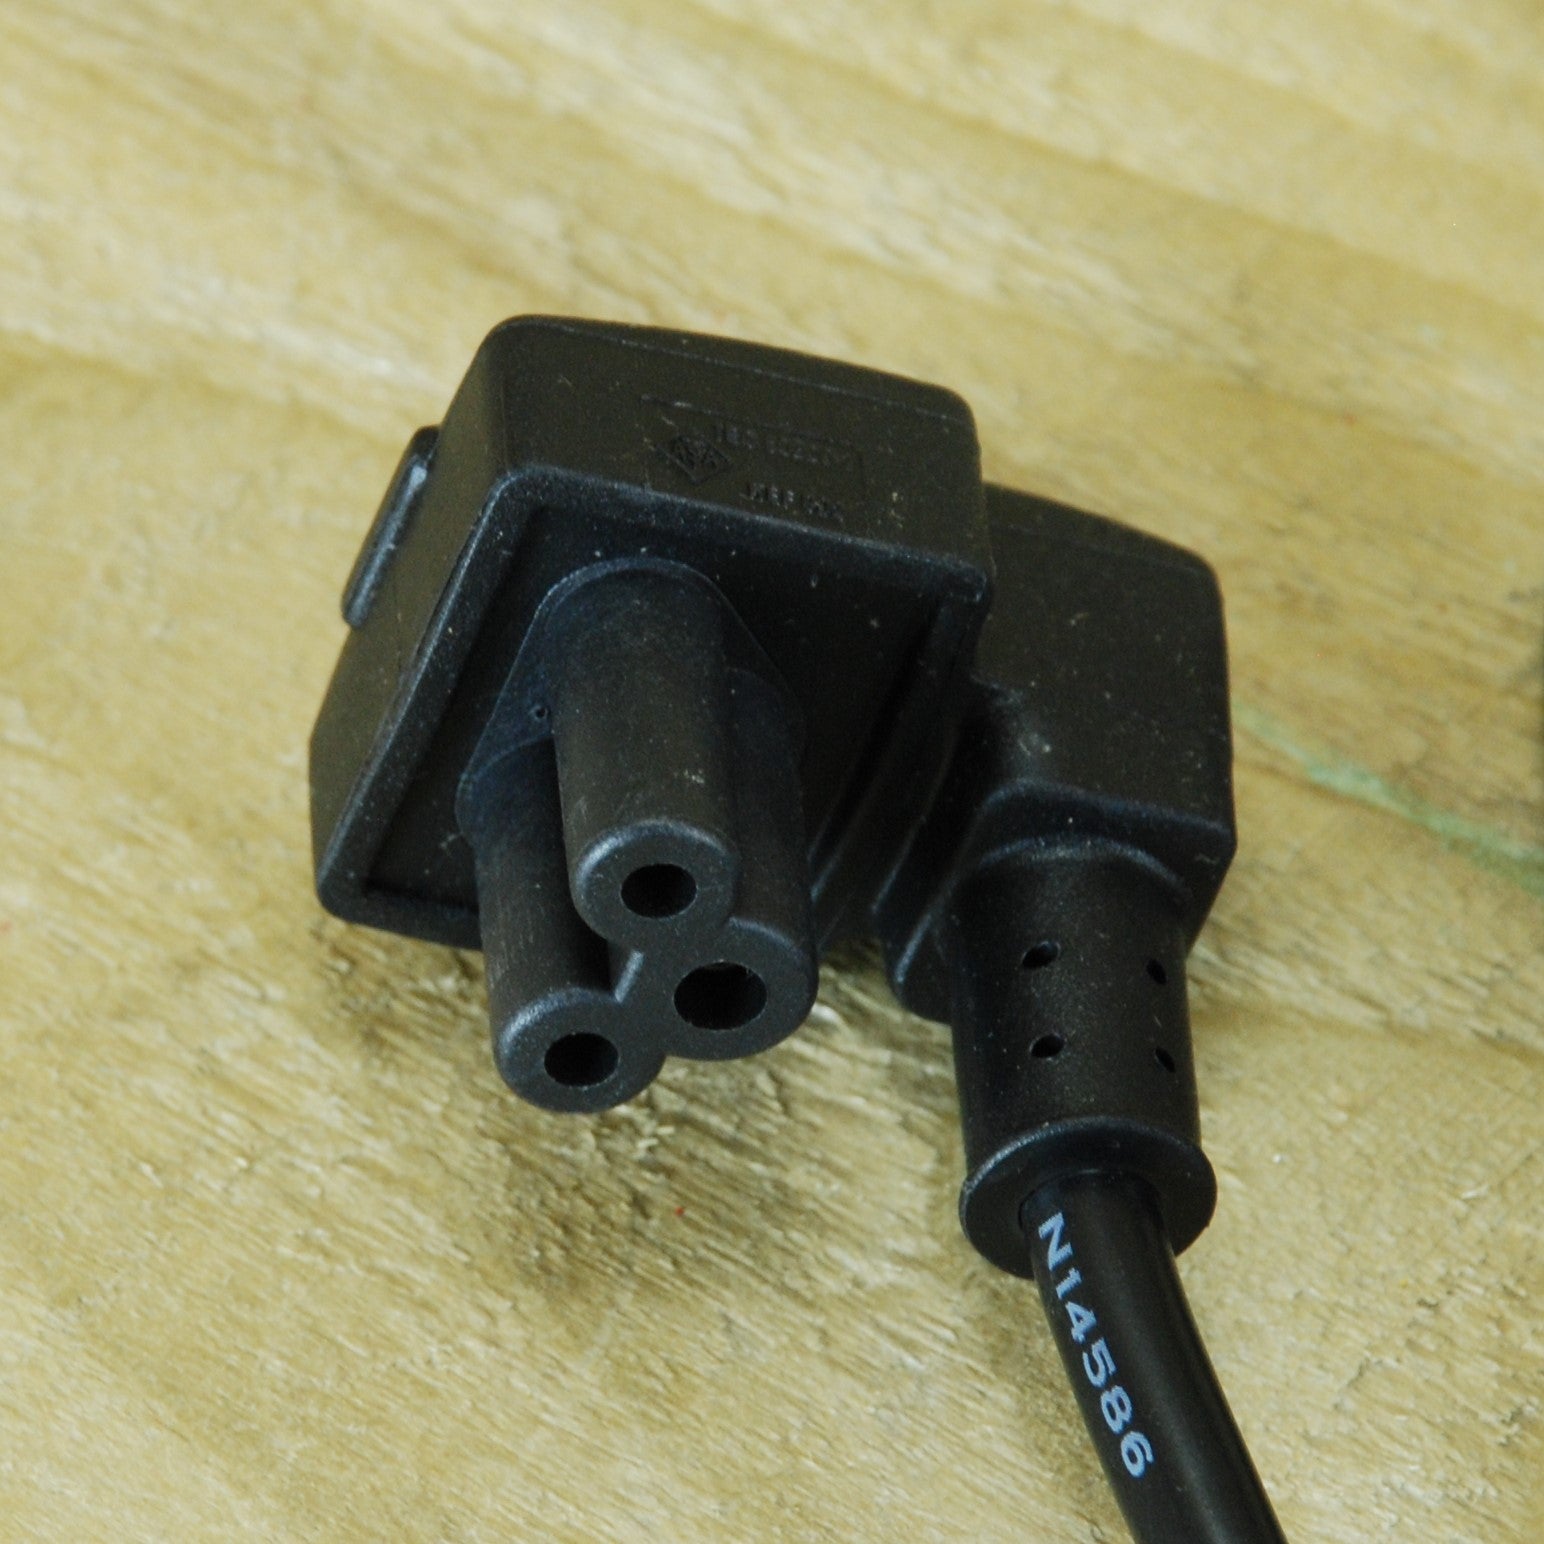 Spare Mains Power Cord C5 1m